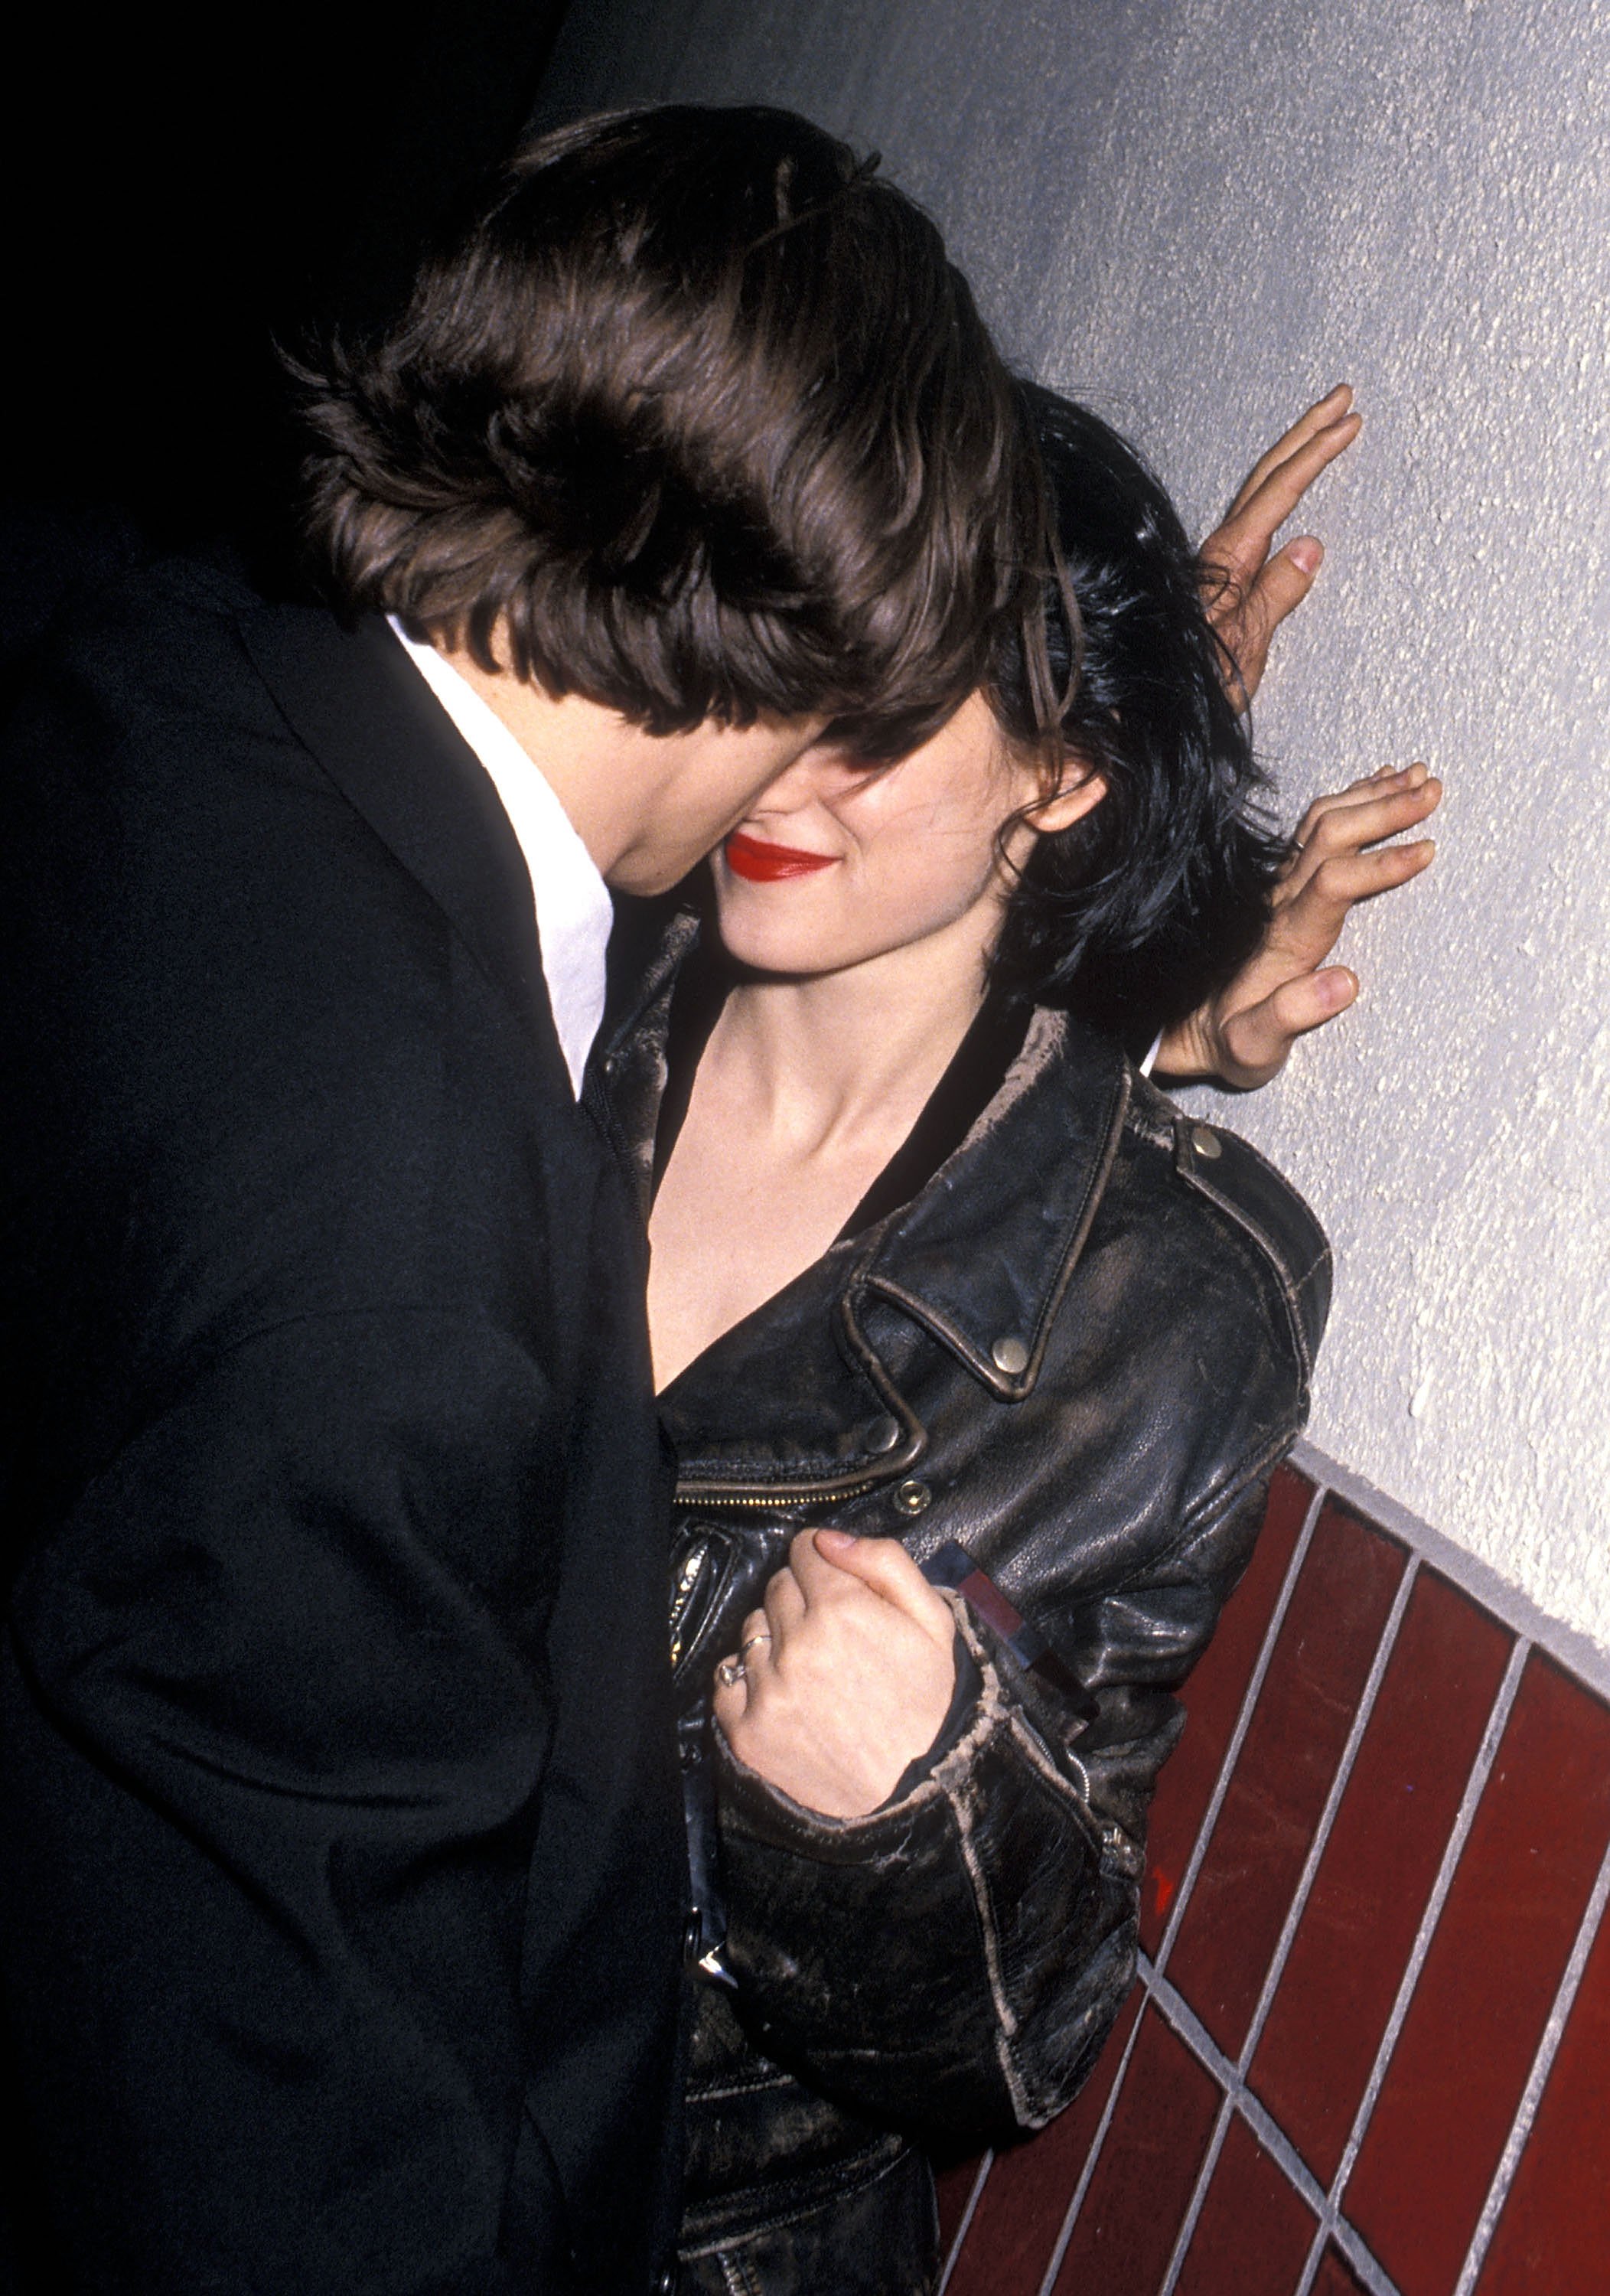 Johnny Depp and Winona Ryder about to kiss